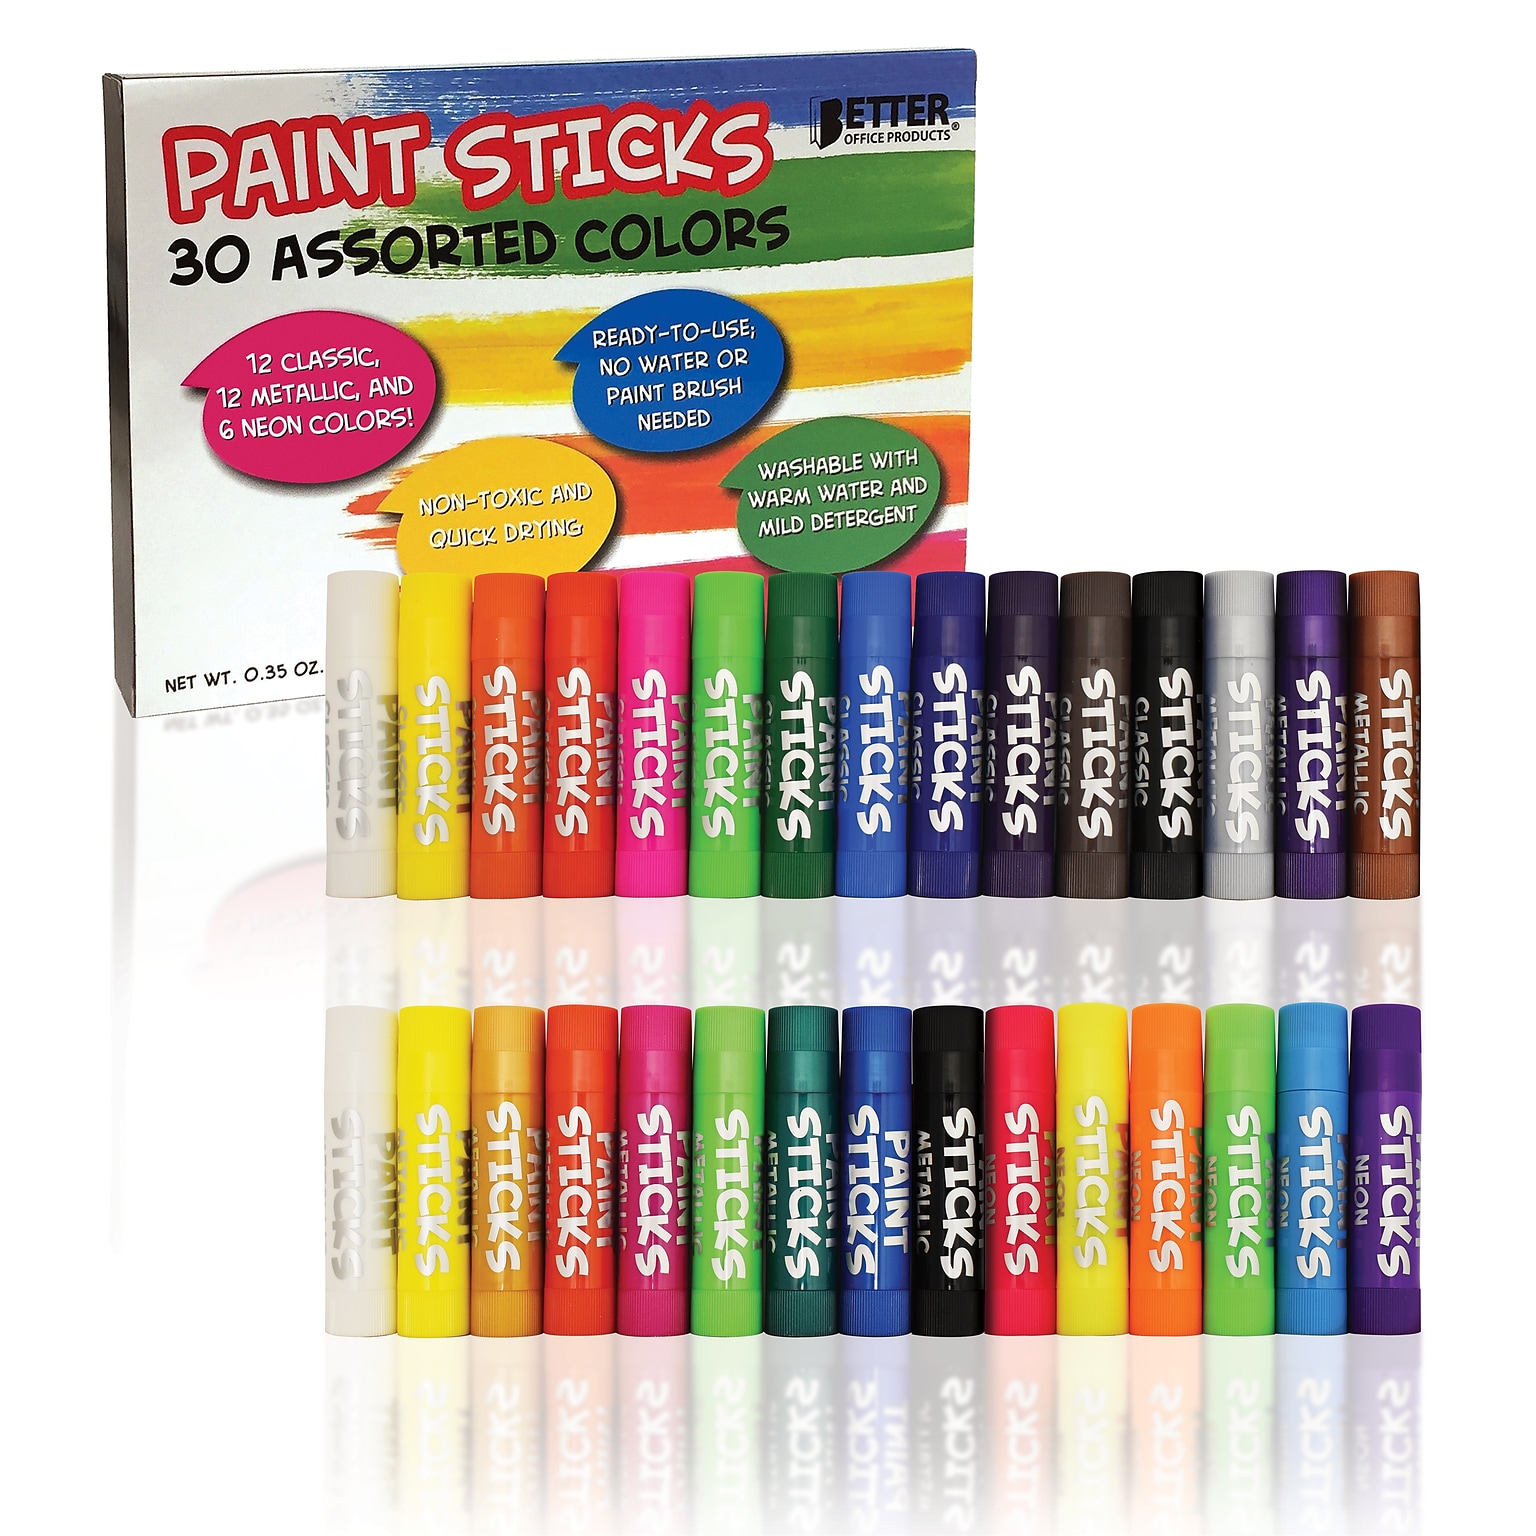 Better Office Products Solid Tempera Paint Sticks, Washable, 30 Assorted Colors, Non-Toxic, 30/Box (00630-30PK)